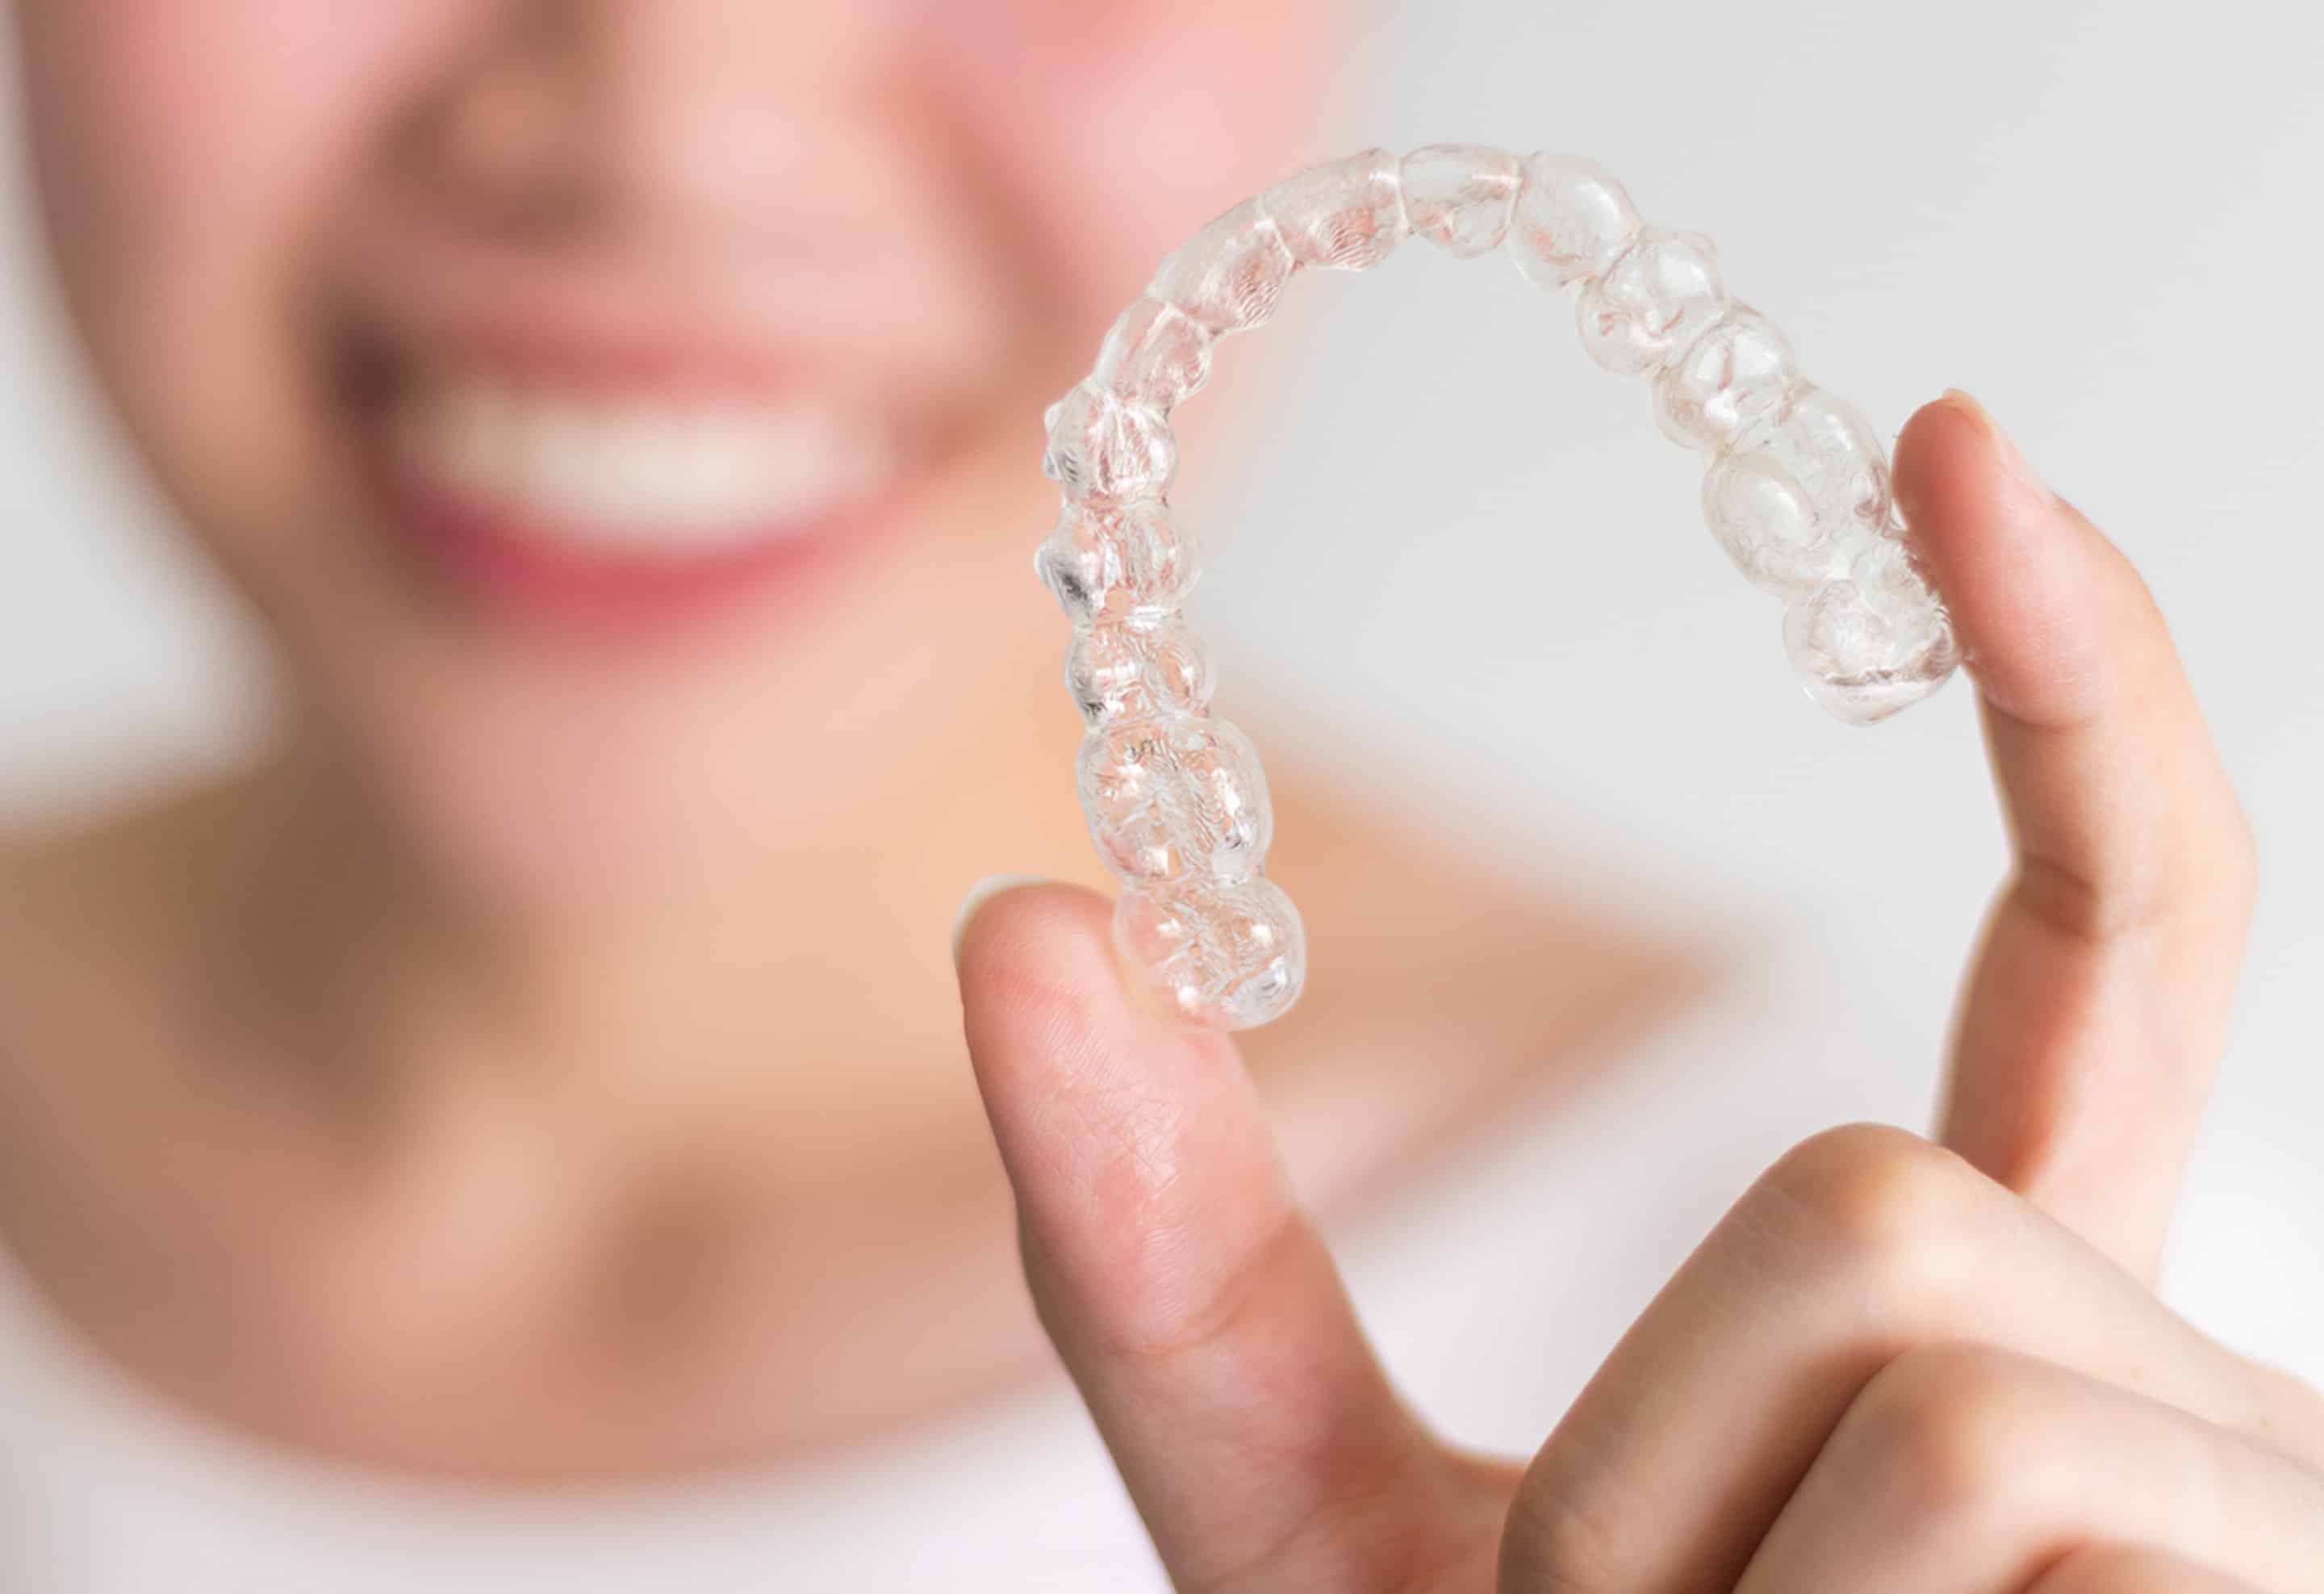 Deciding between Invisalign and Metal Braces and benefits.